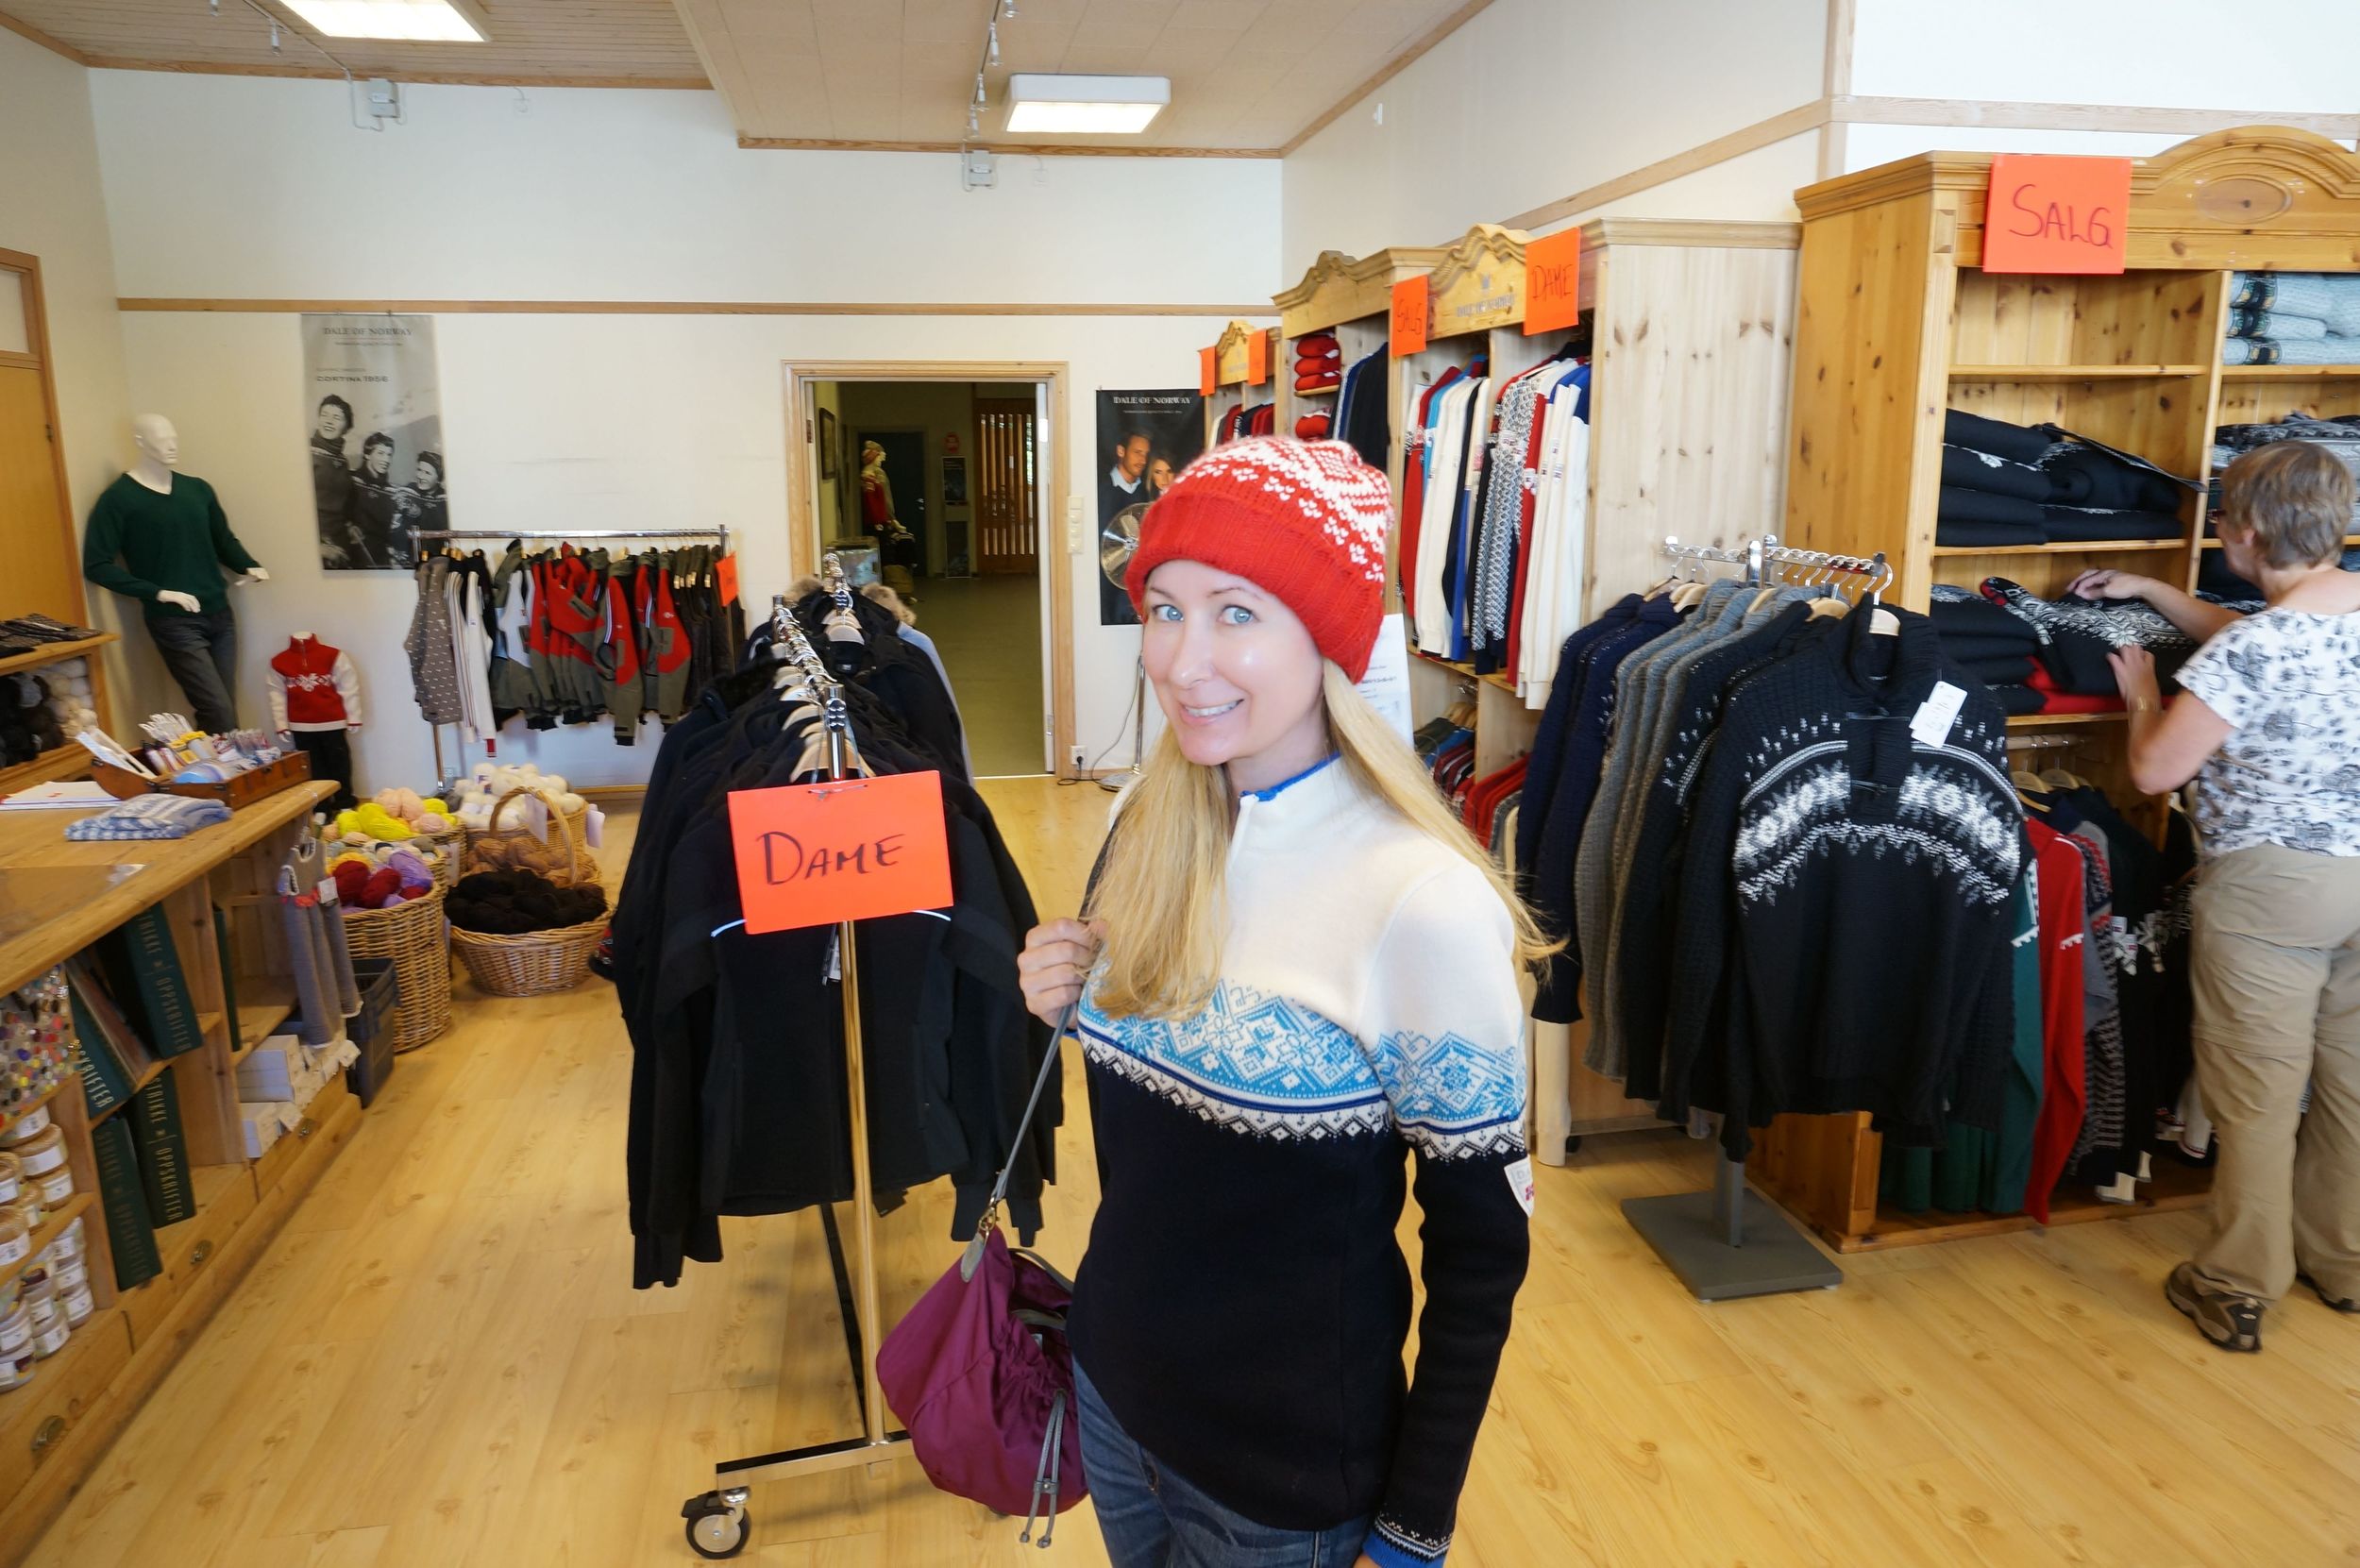 Finding Norwegian Sweaters at the Source: a Visit to the Dale of Norway Factory and Outlet Store